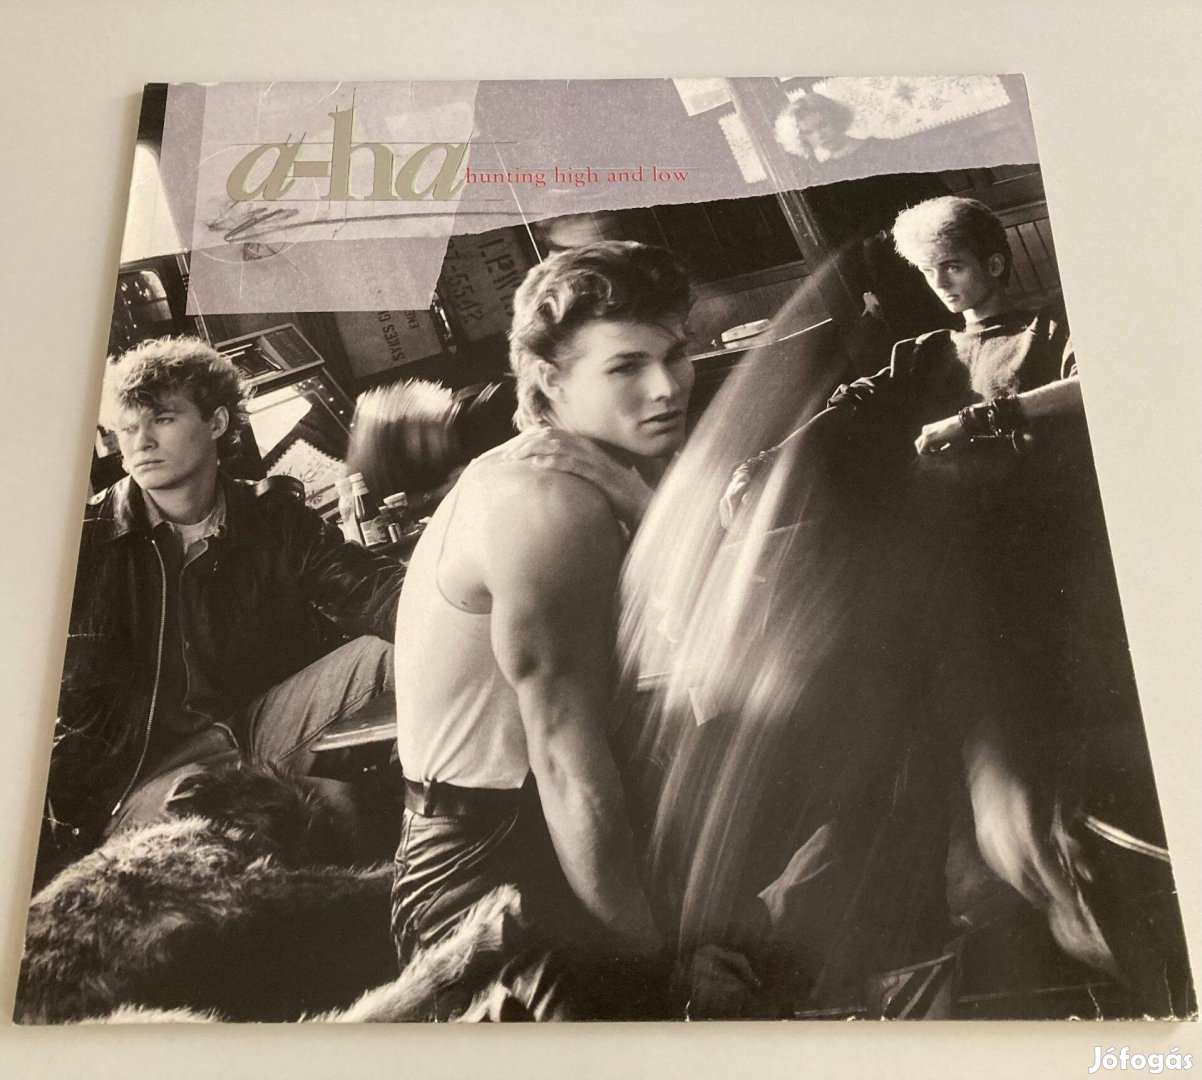 A-ha - Hunting High And Low (Made in Germany, 1985)